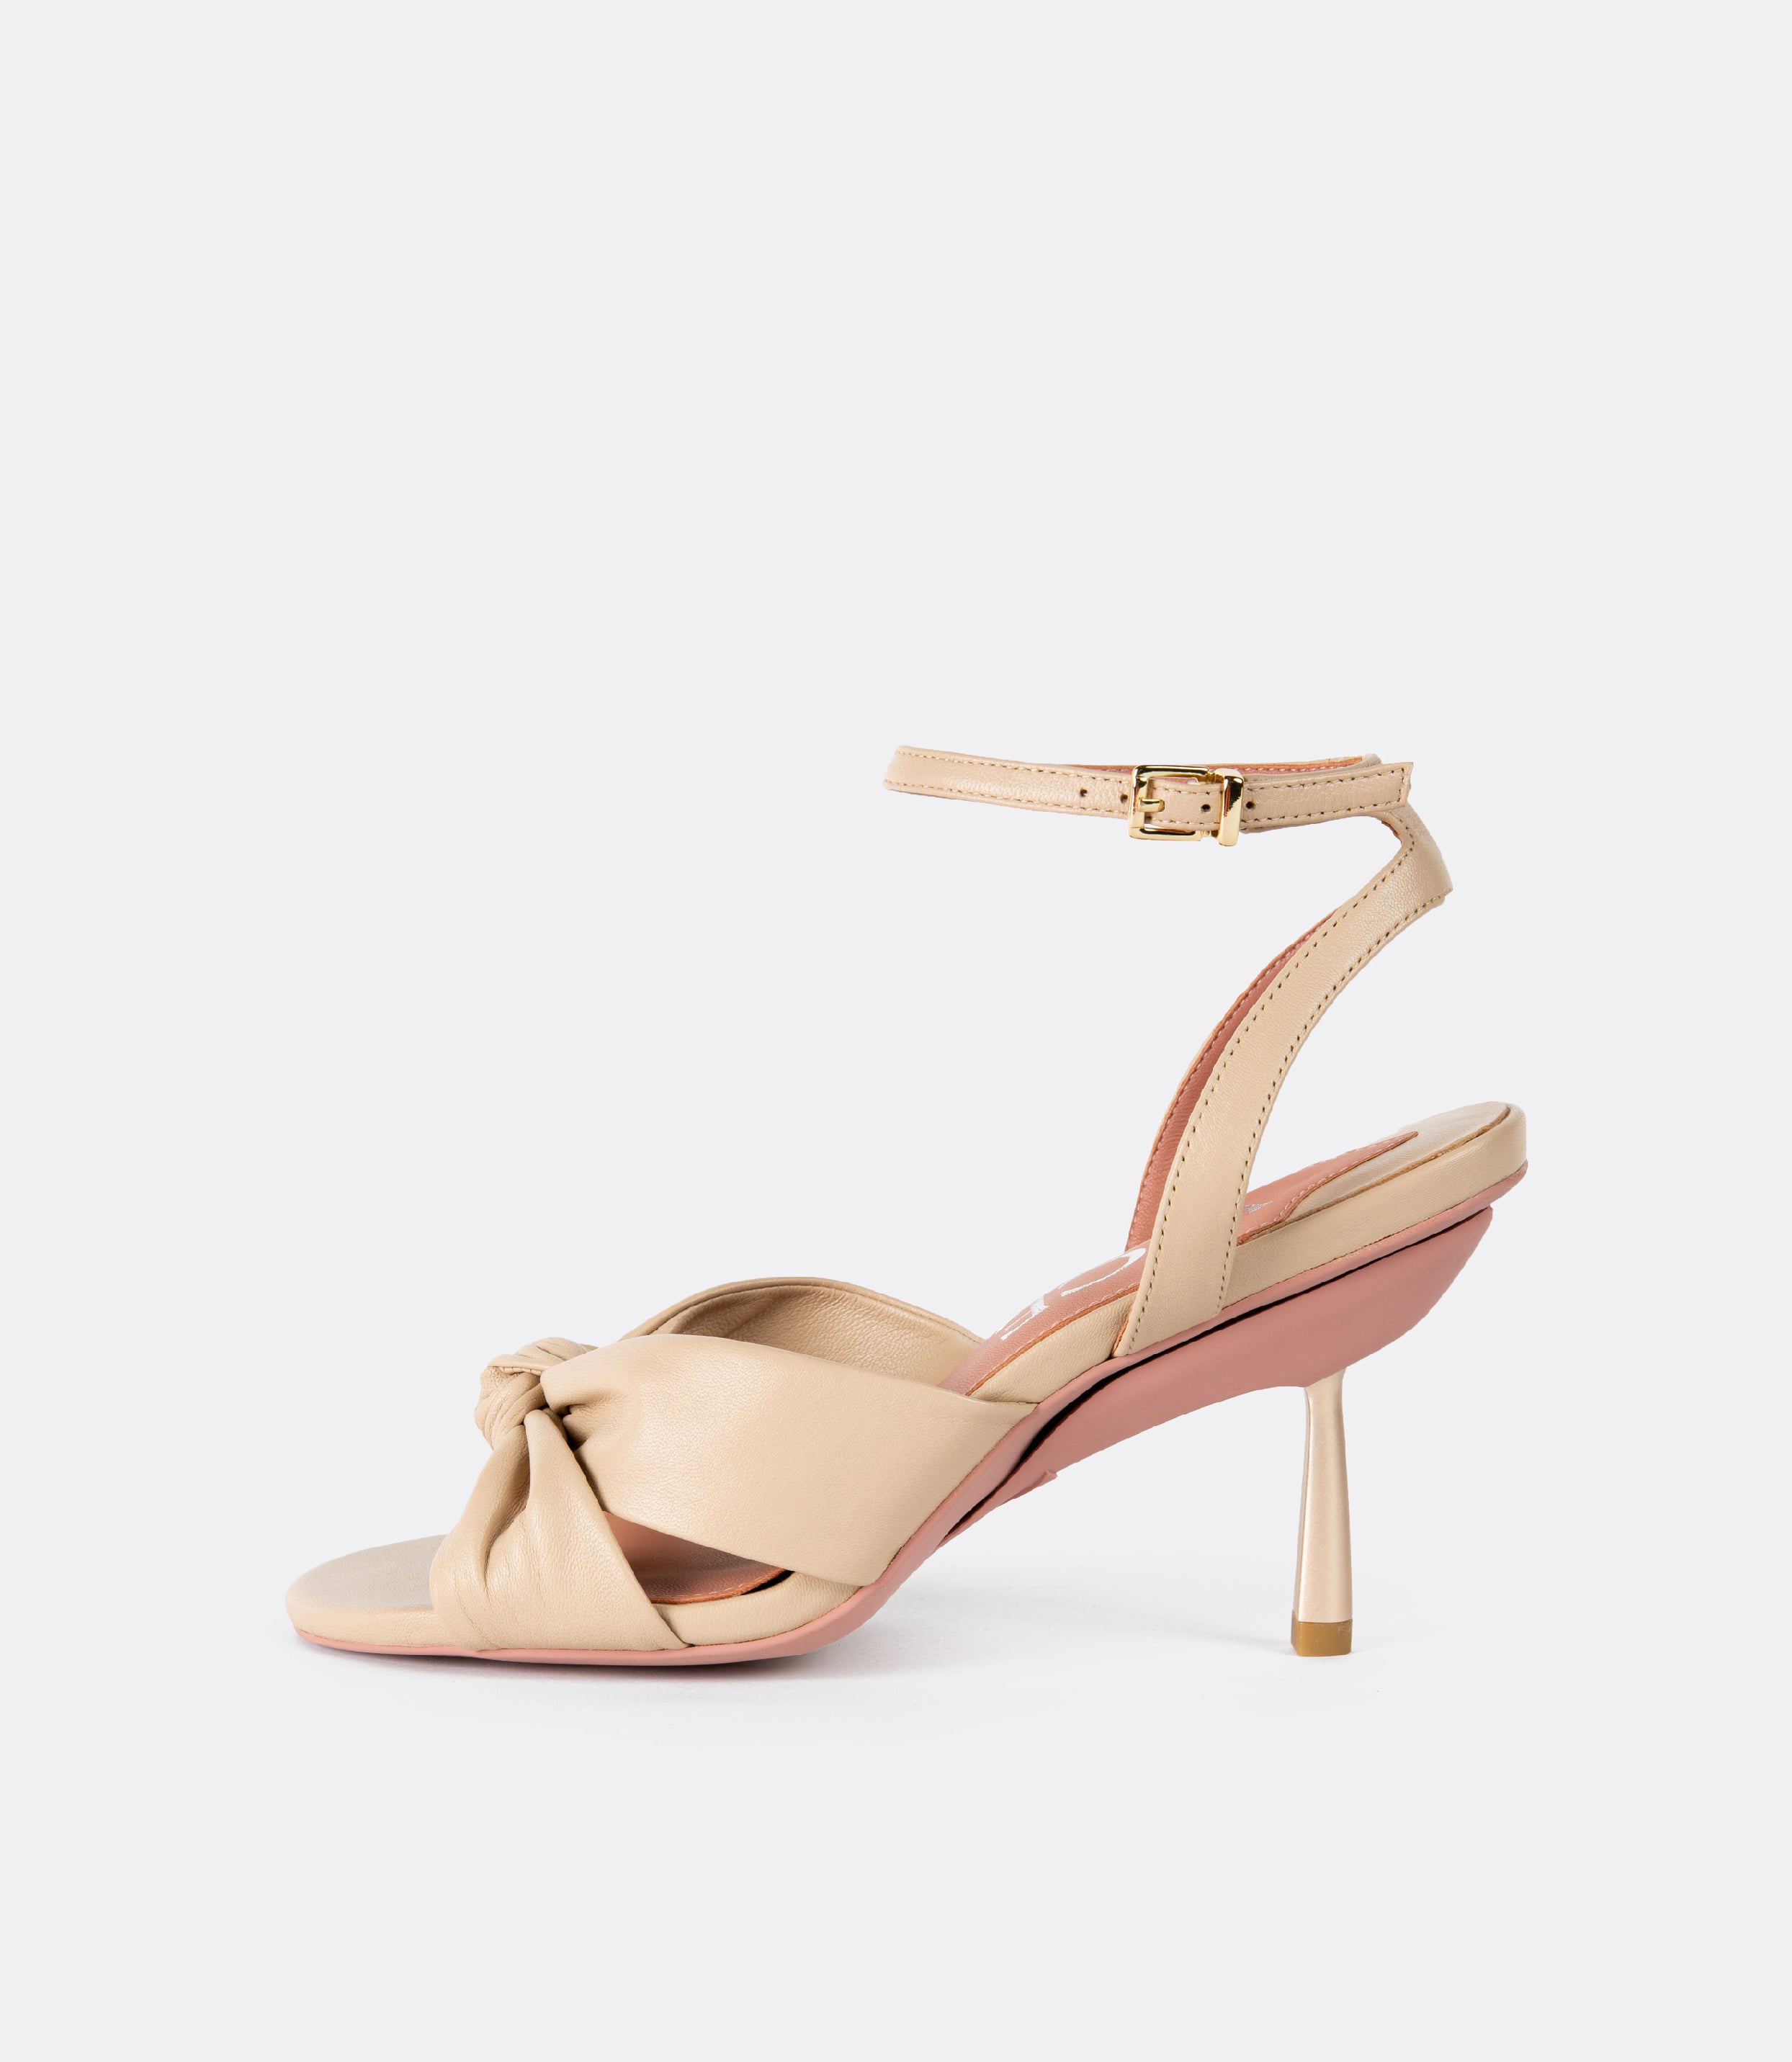 Side view of the beige leather sandals as heels